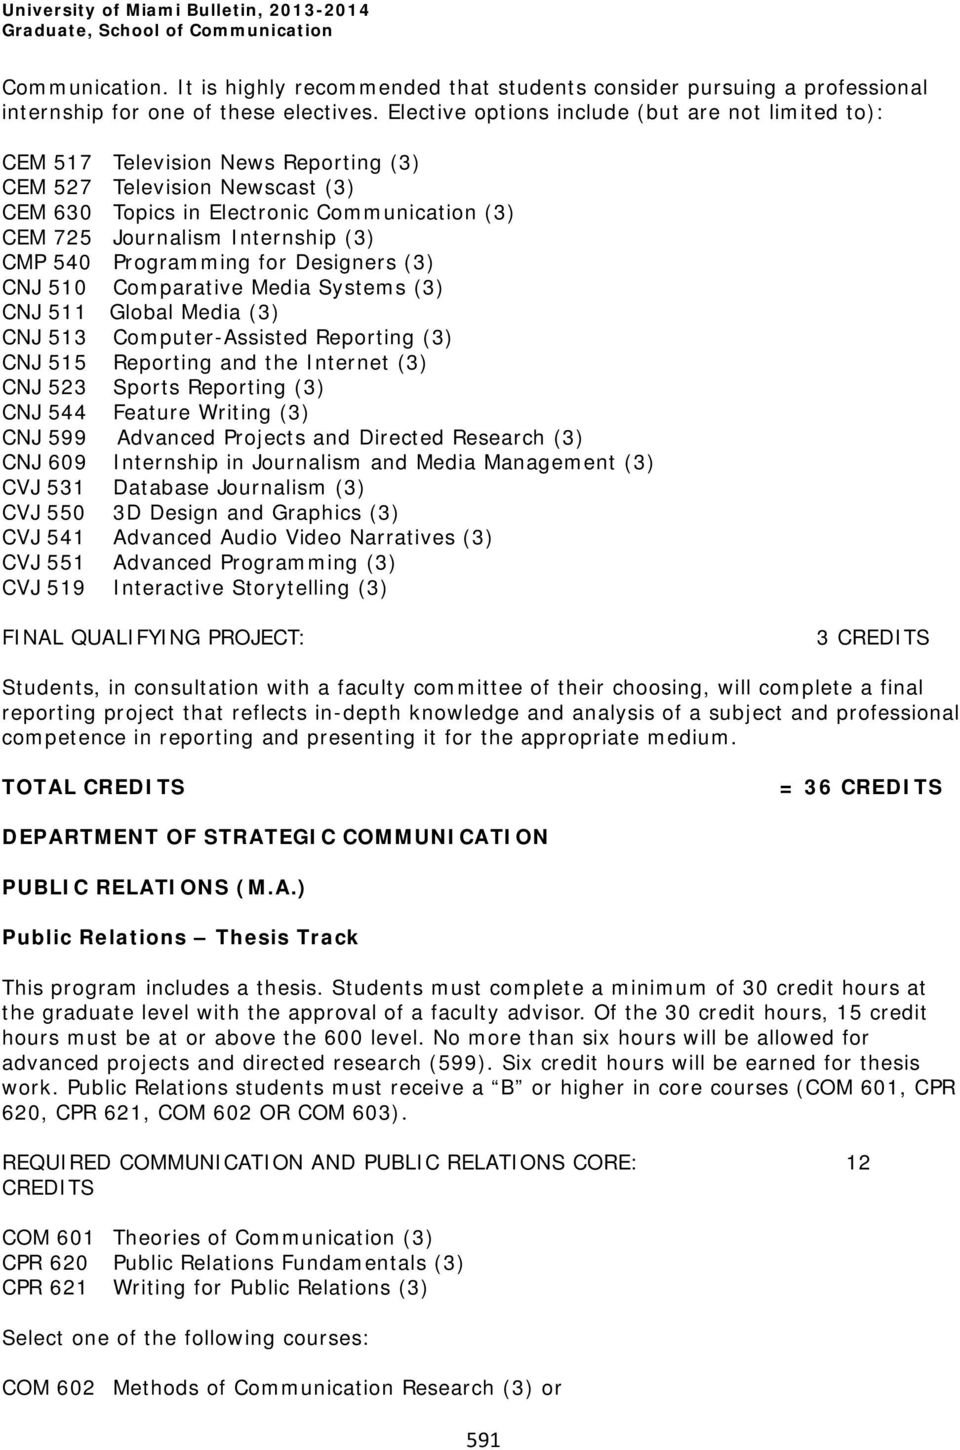 (3) CMP 540 Programming for Designers (3) CNJ 510 Comparative Media Systems (3) CNJ 511 Global Media (3) CNJ 513 Computer-Assisted Reporting (3) CNJ 515 Reporting and the Internet (3) CNJ 523 Sports